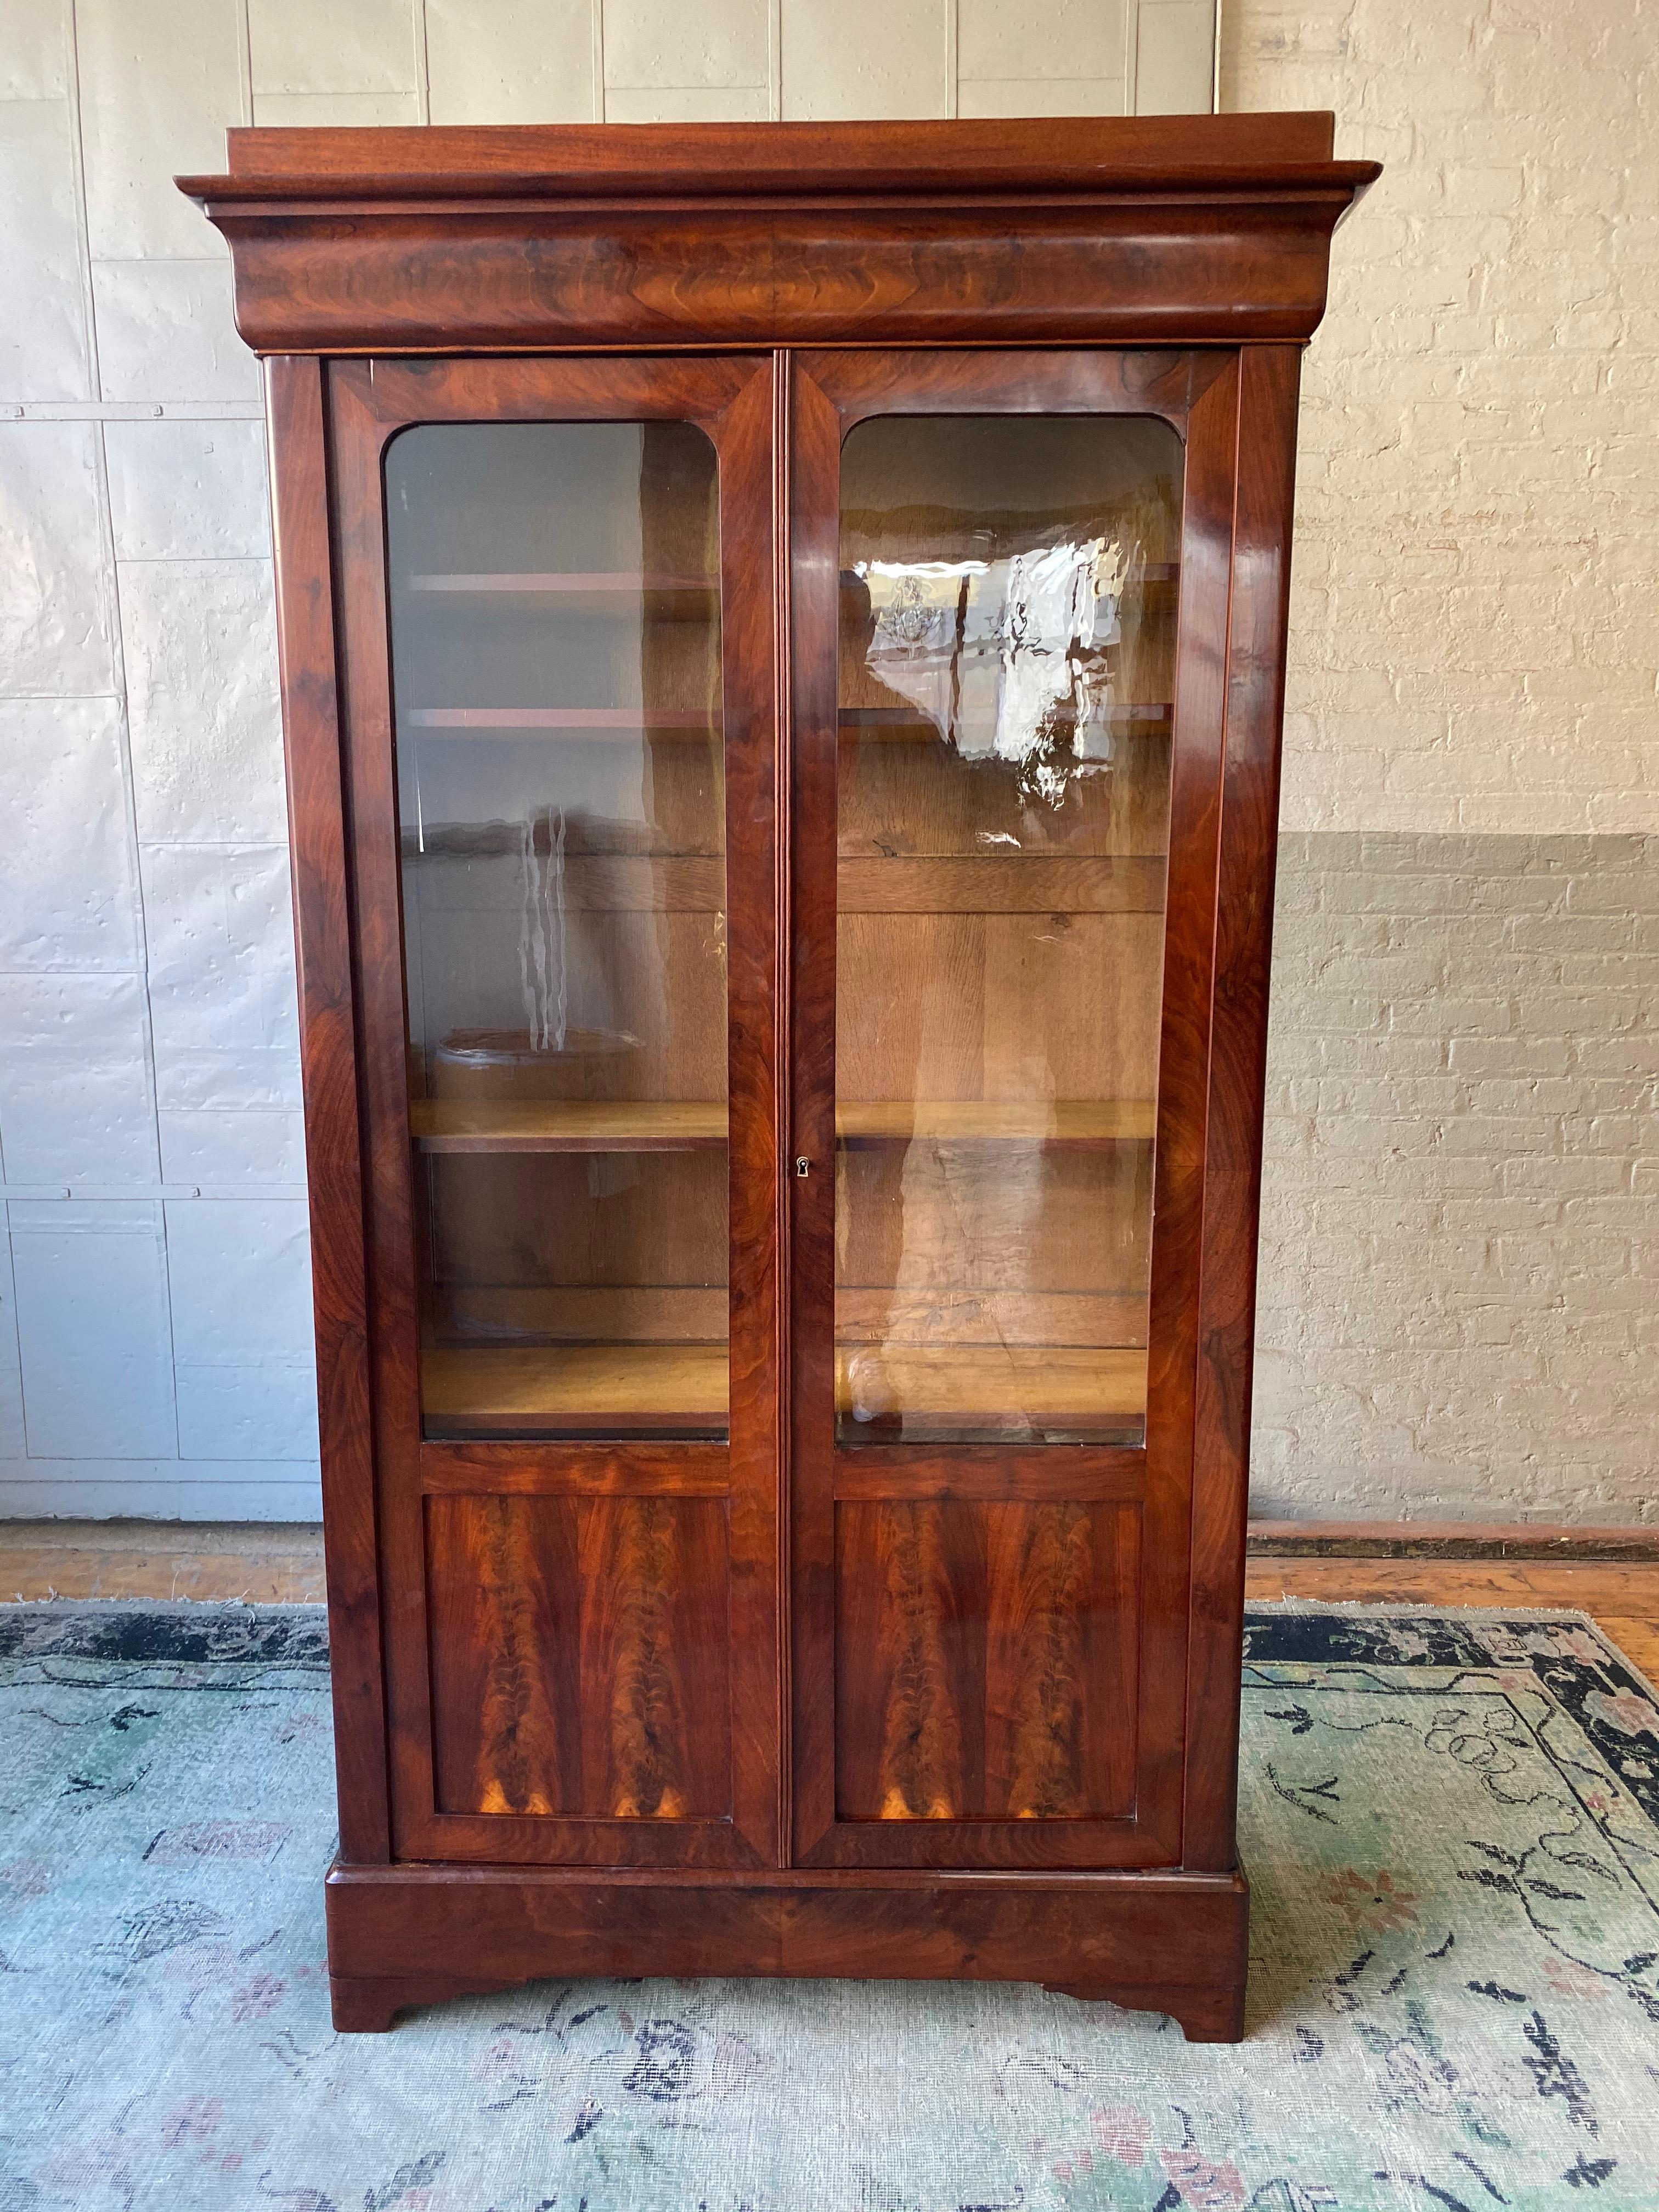 Small French Louis Philippe 19th century bookcase in mahogany veneers. The glass is original. The bookcase was recently polished is in very good condition.